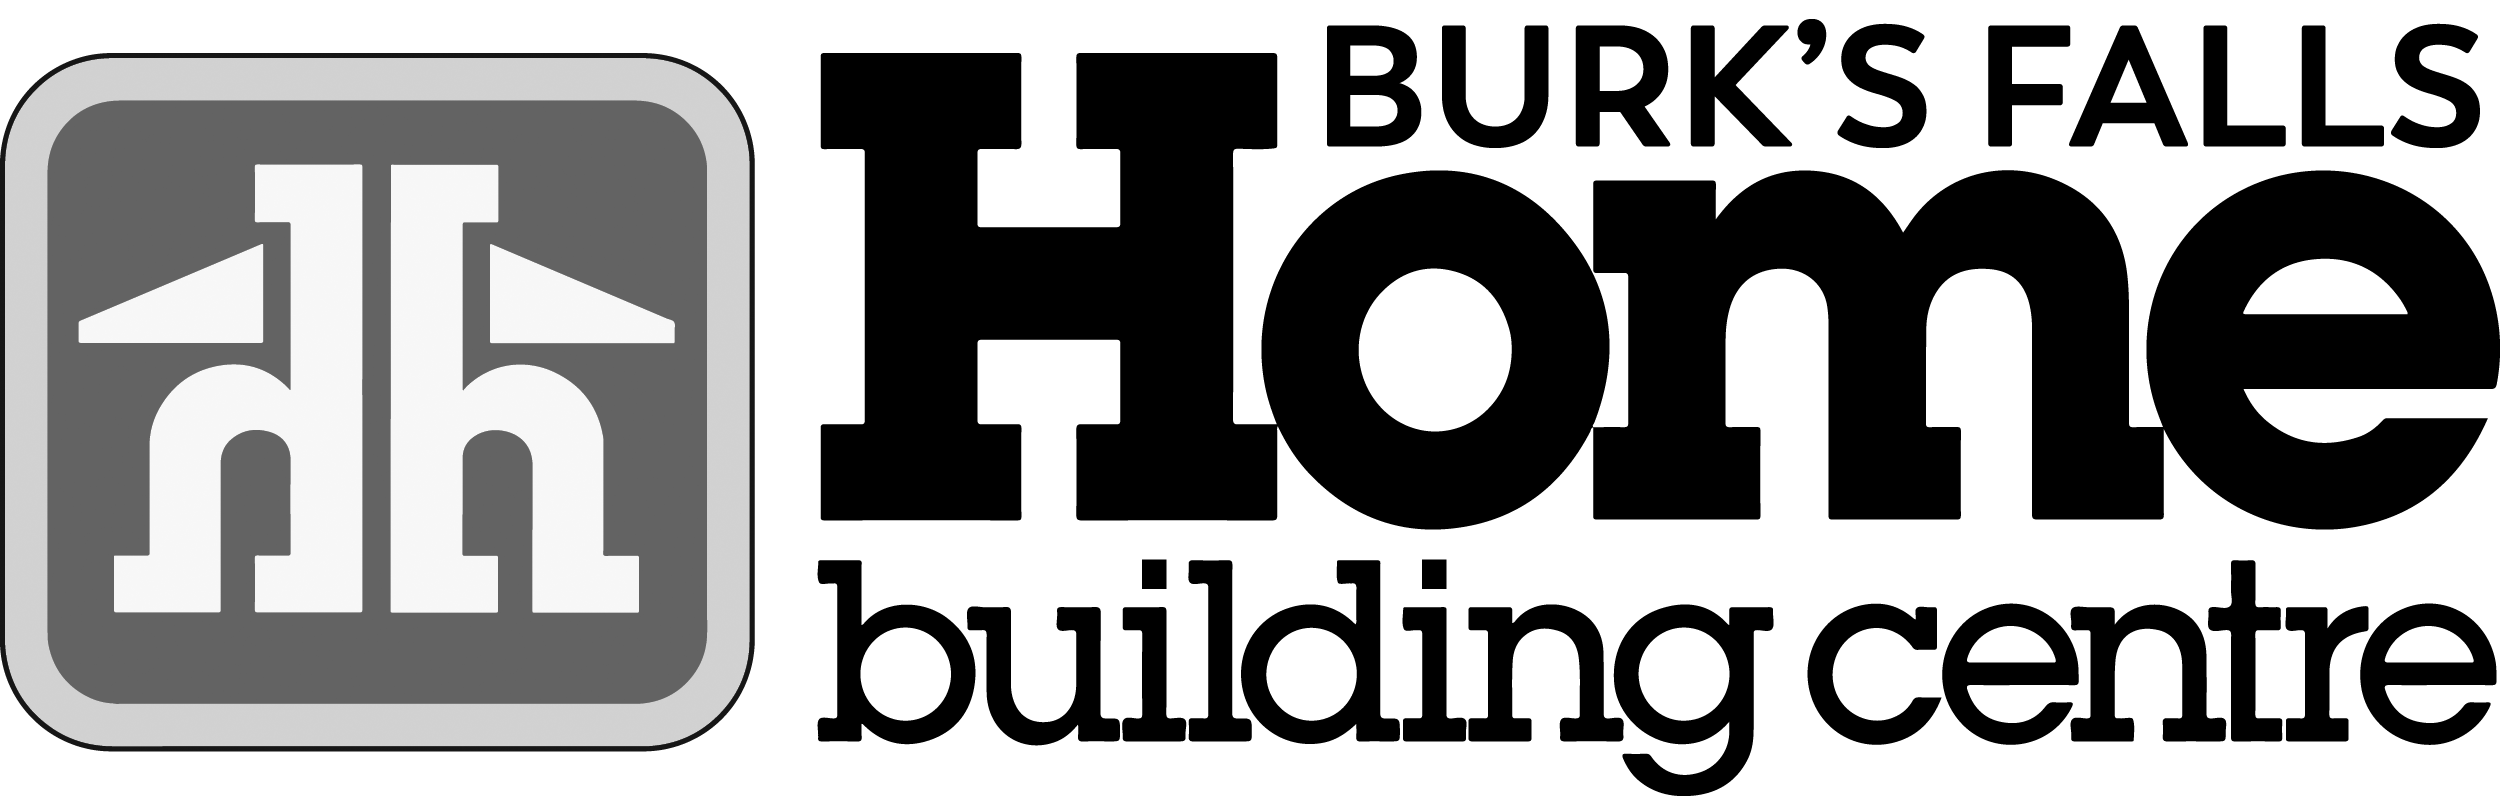 BFHBC_new logo_grayscale.png